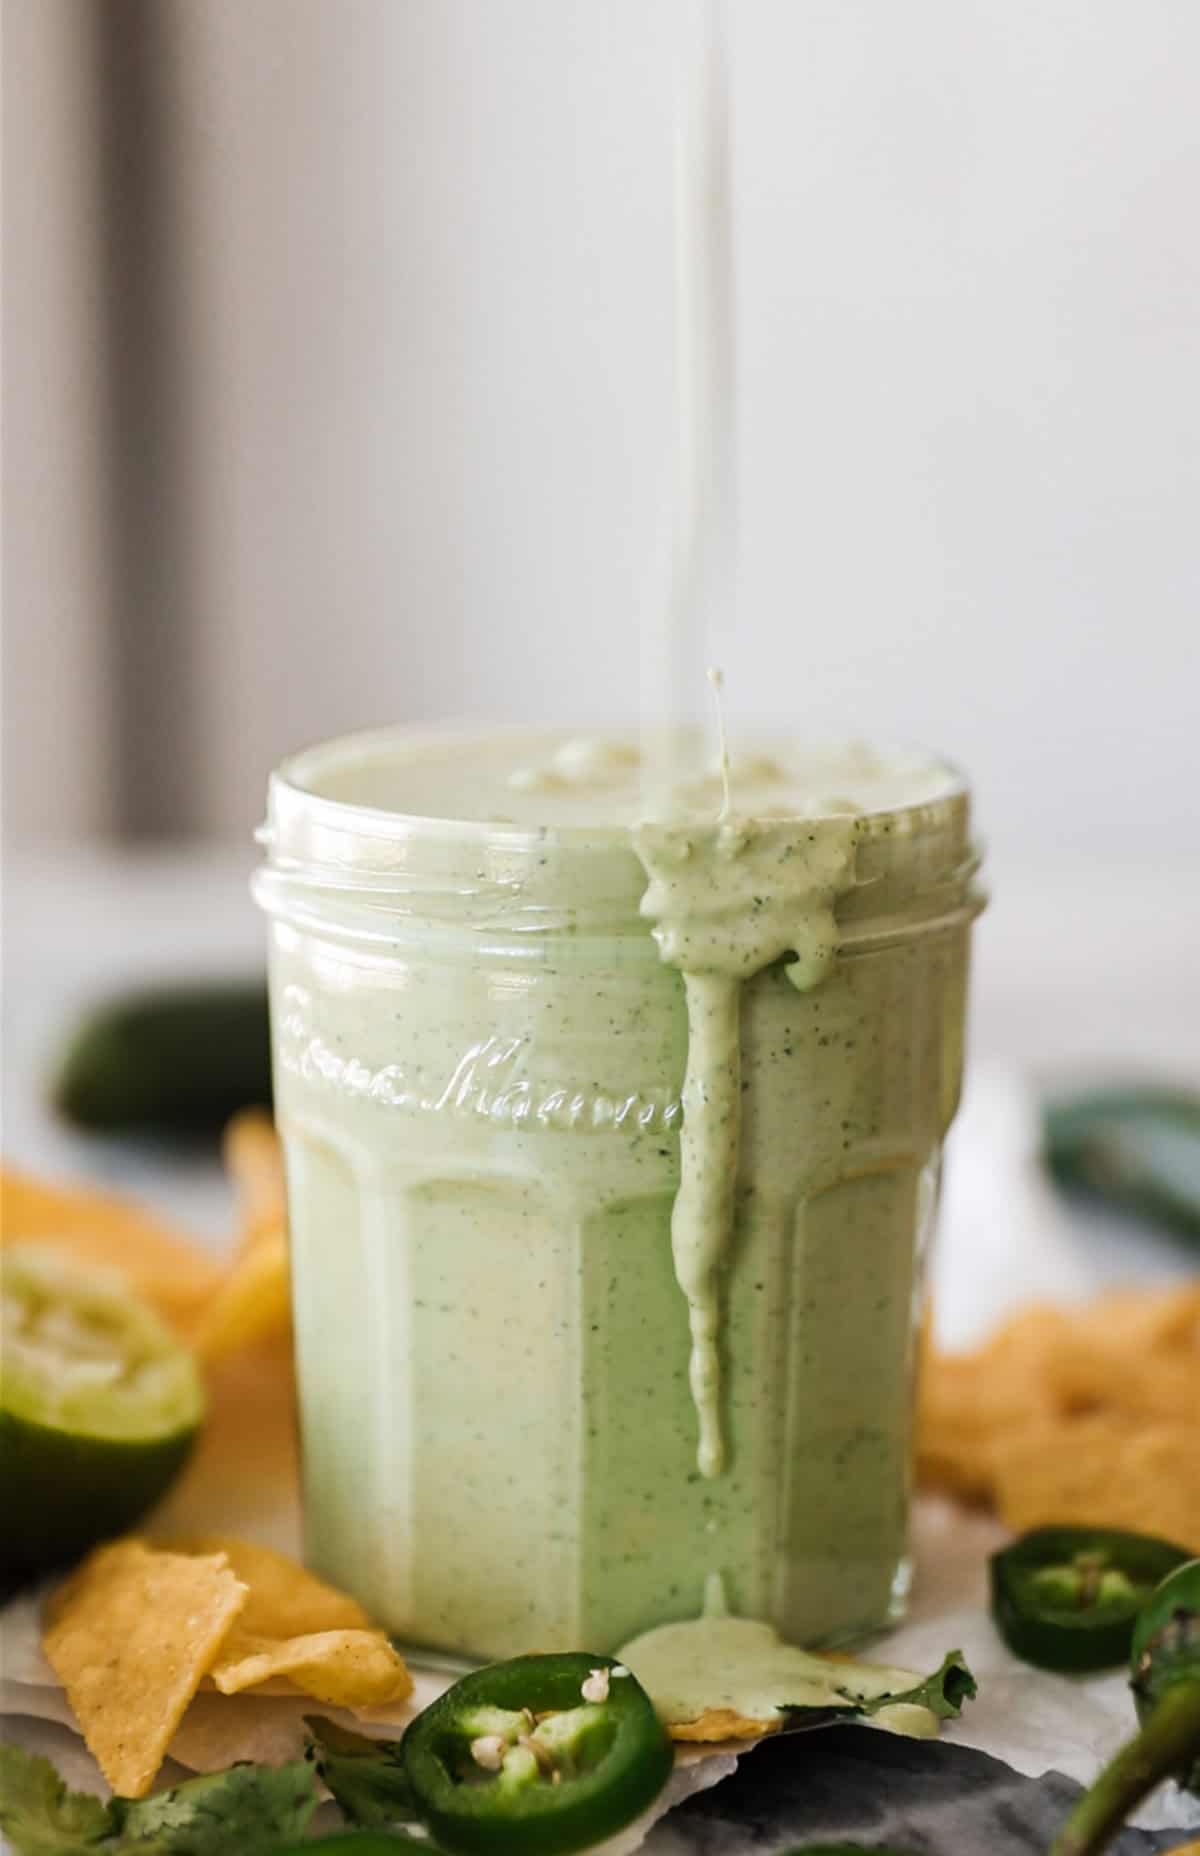 Creamy Jalapeno sauce being poured into a glass jar.